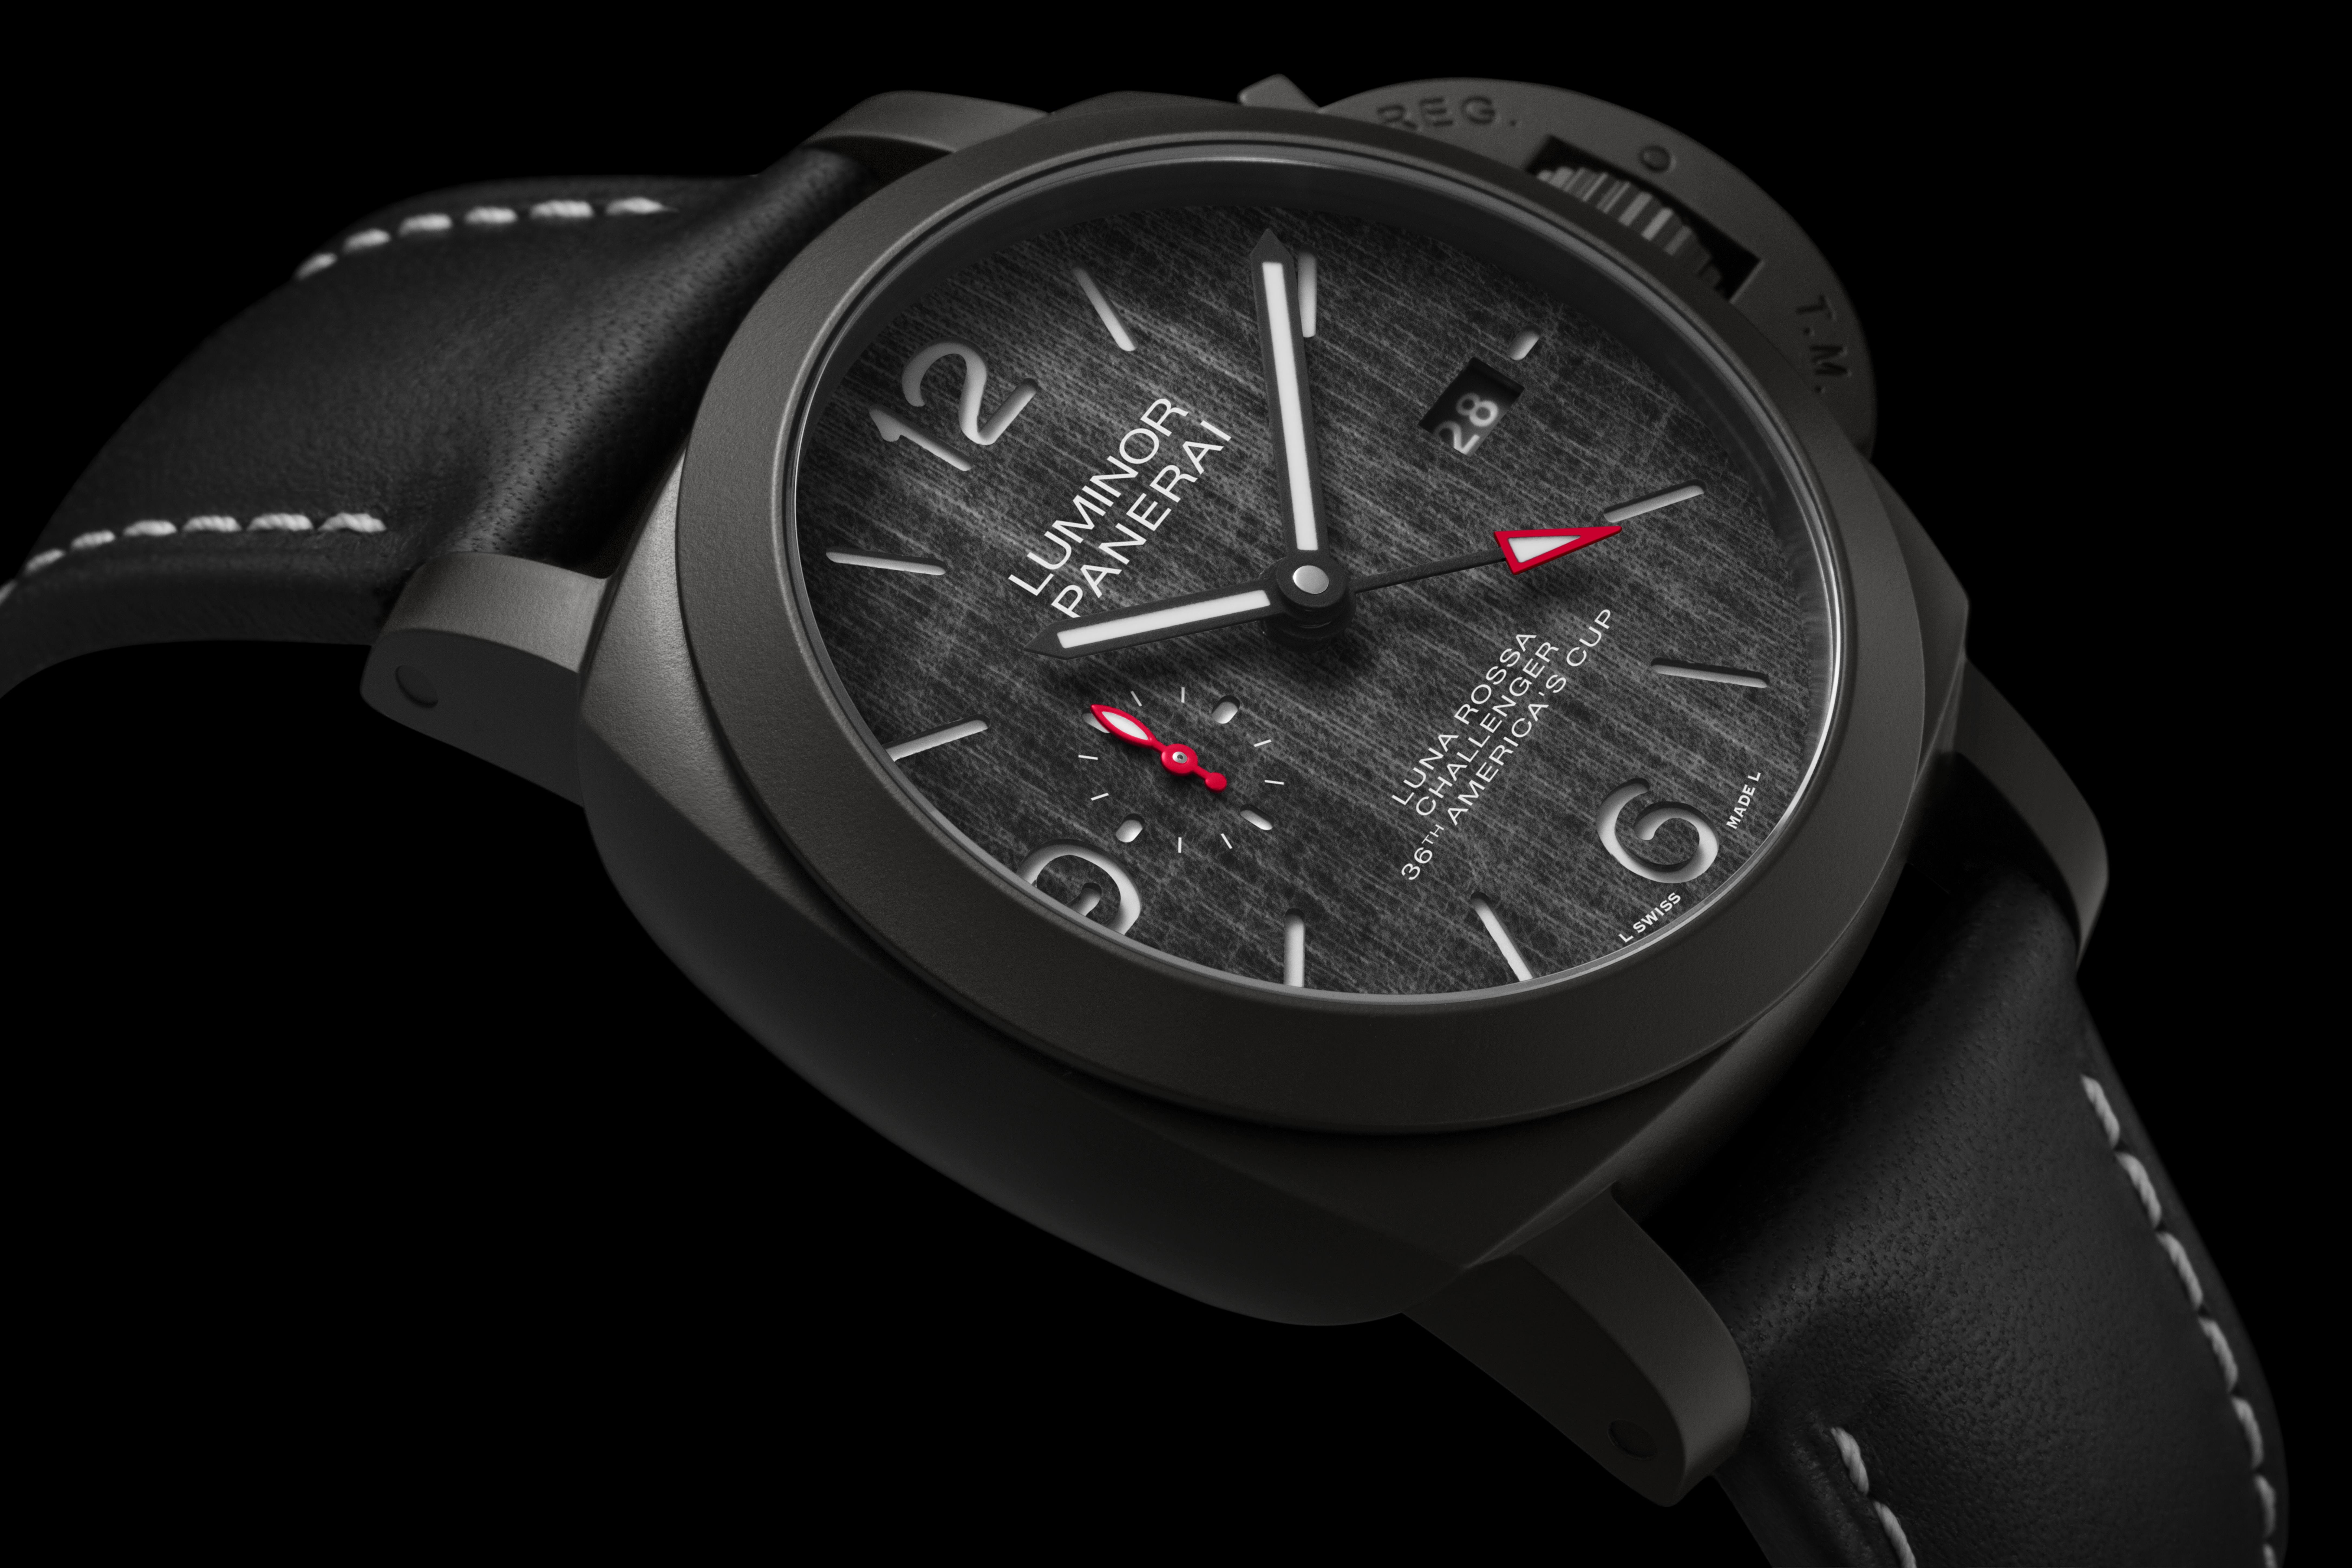 Panerai's Luminor Luna Rossa GMT 44mm (PAM01036) is one of three new models launched in Hong Kong by the luxury watch brand.